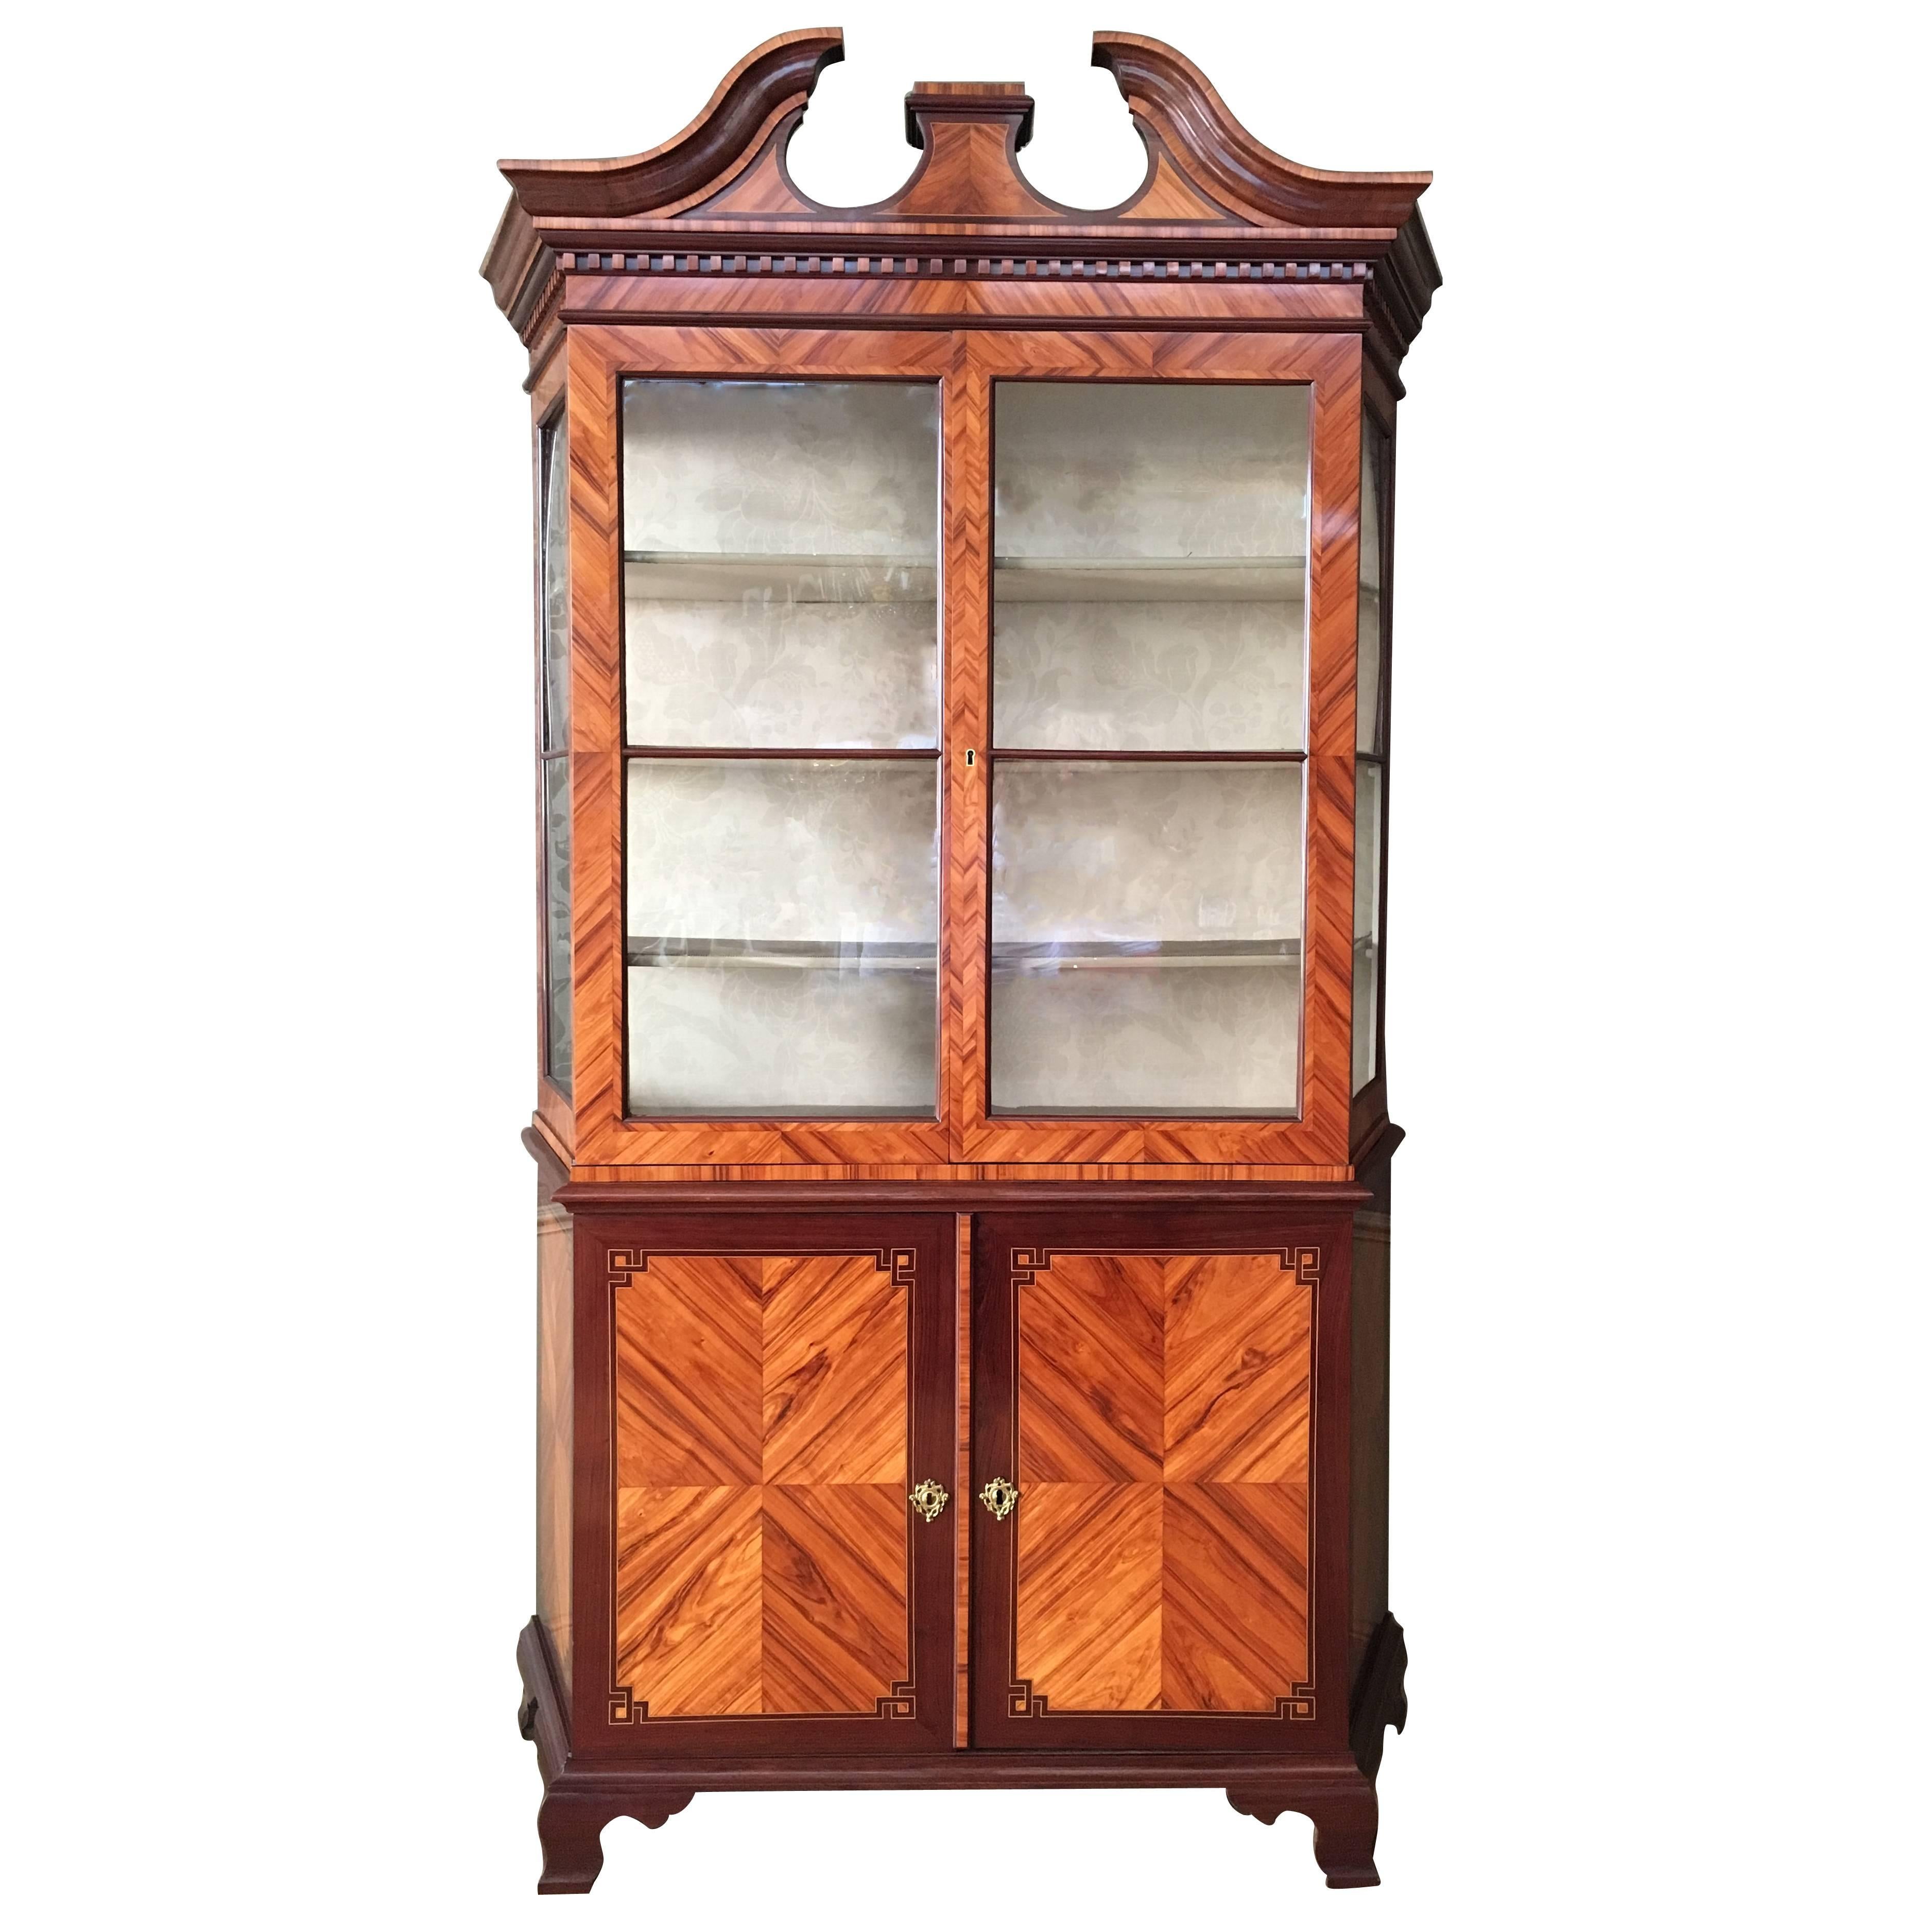 A Very Unusual Display Cabinet For Sale